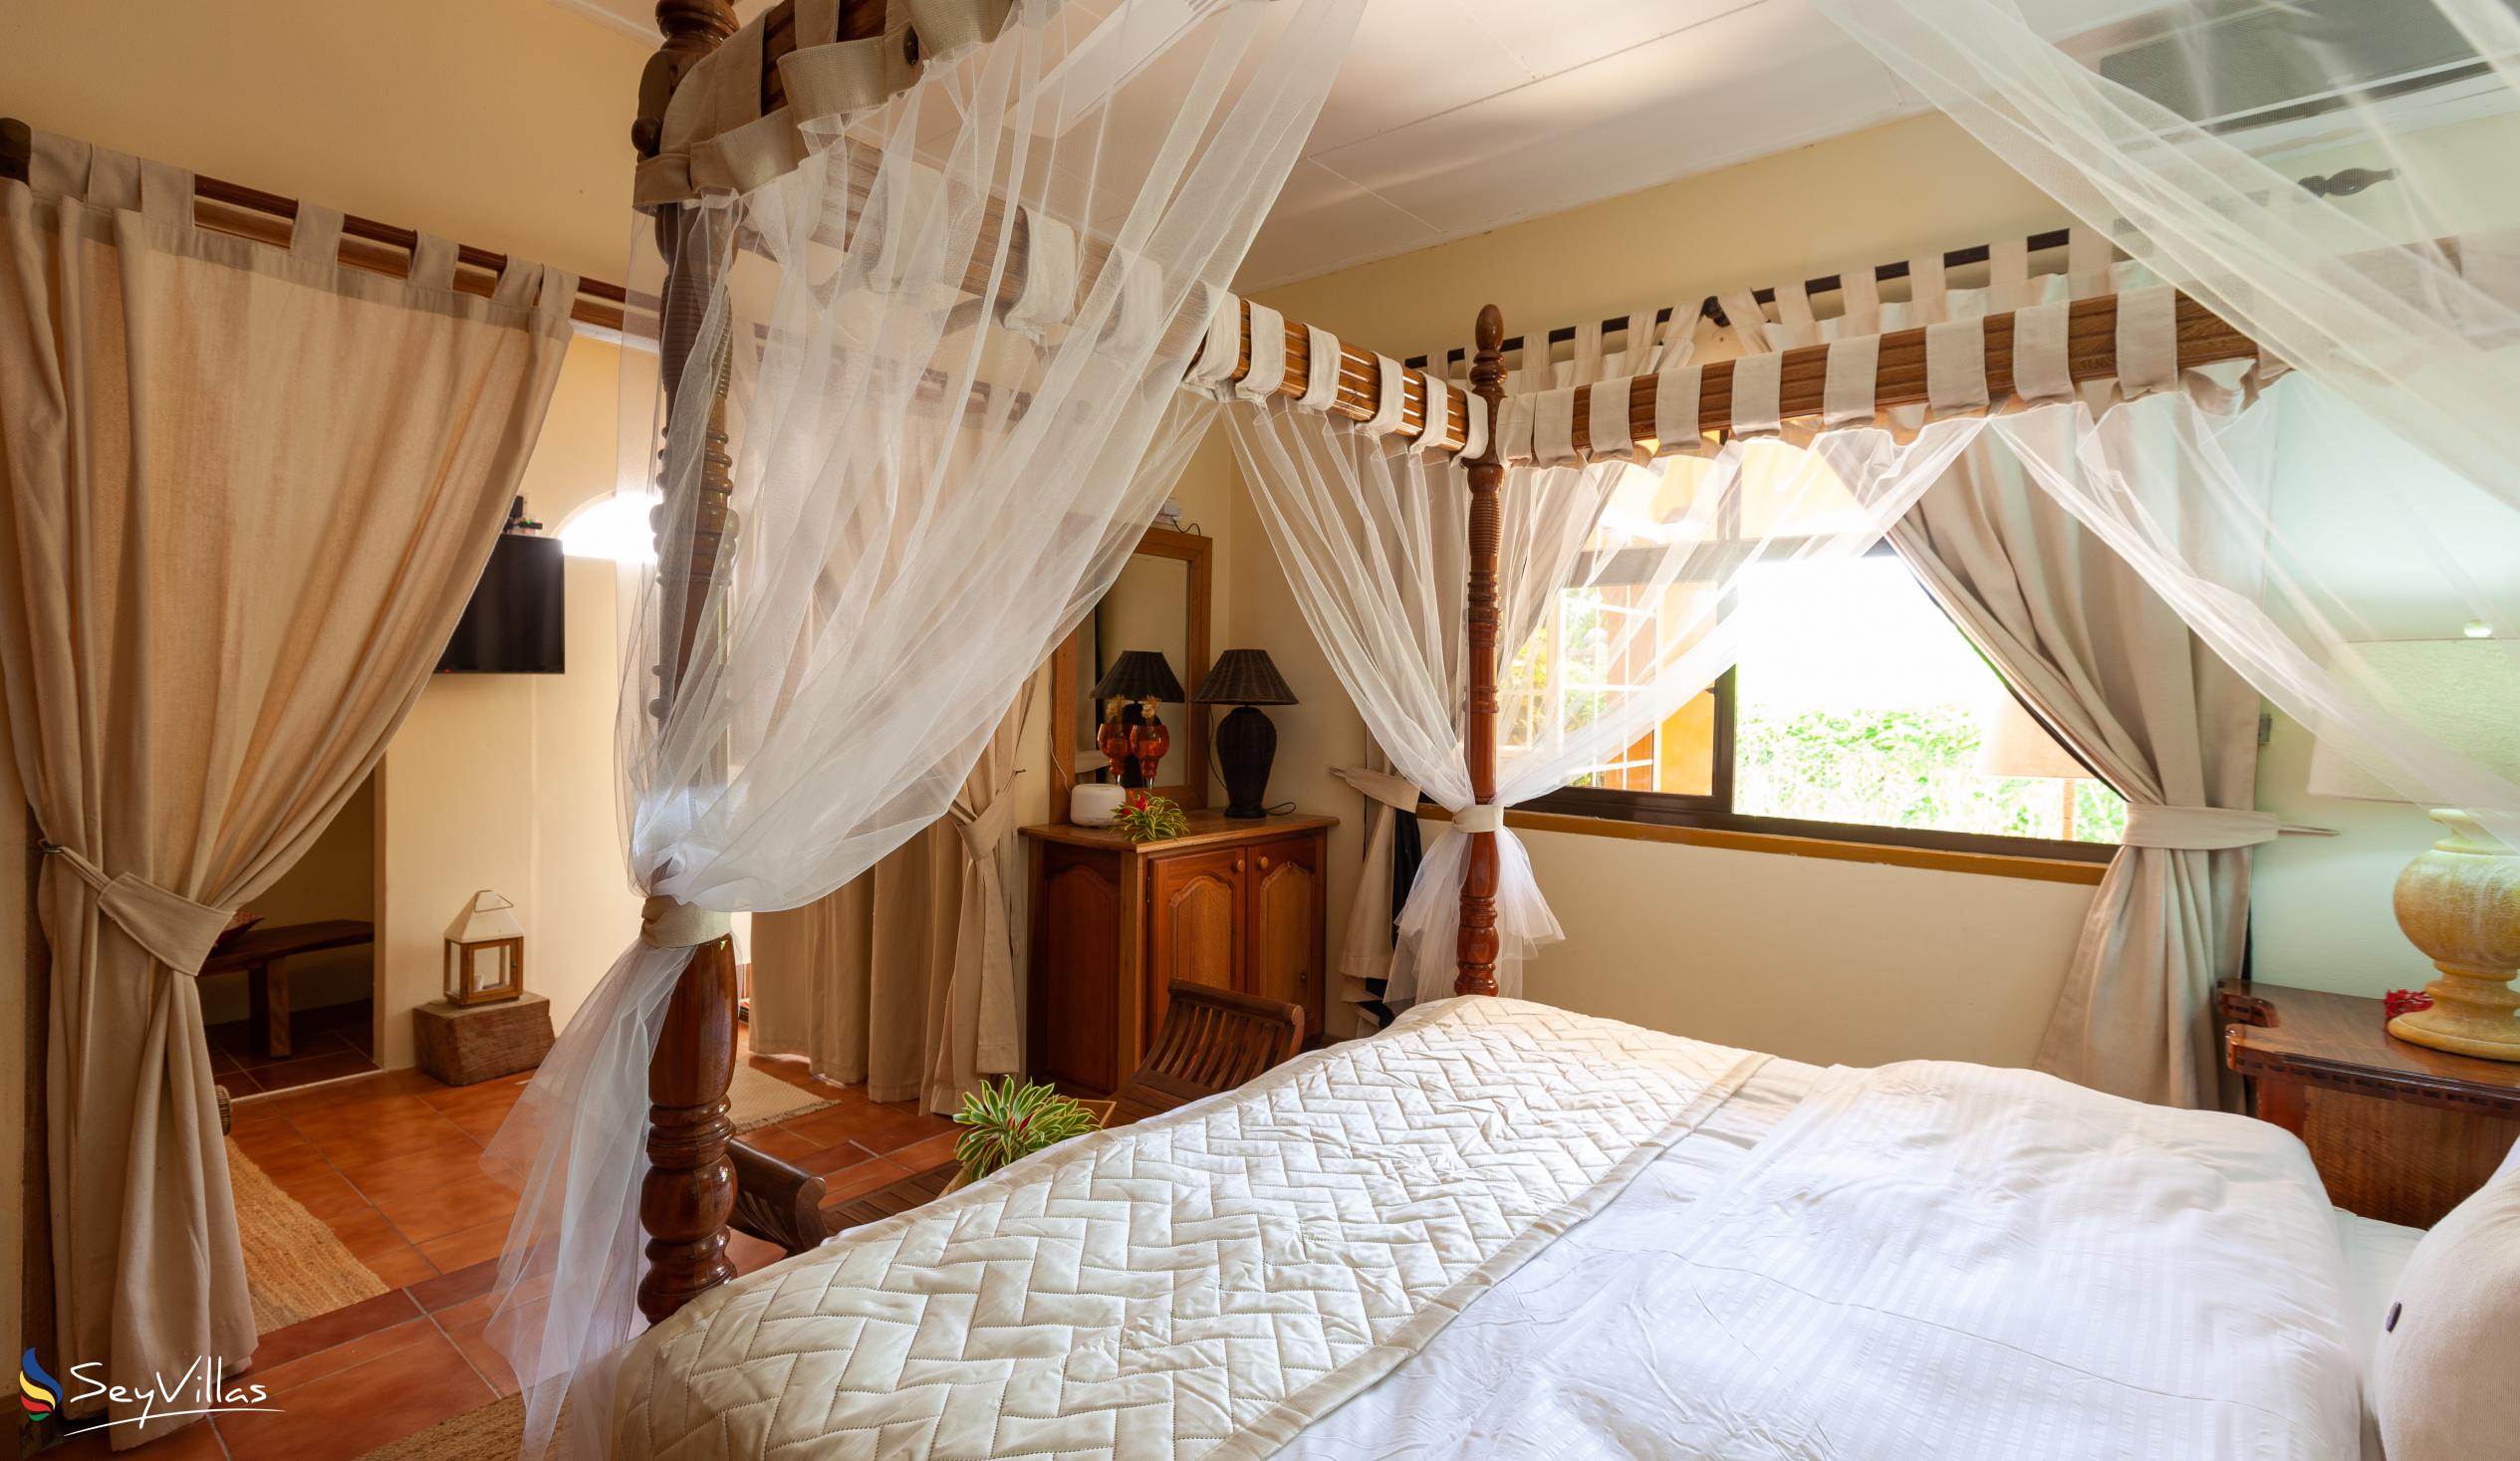 Photo 36: Oceane Self Catering - Family Room - La Digue (Seychelles)